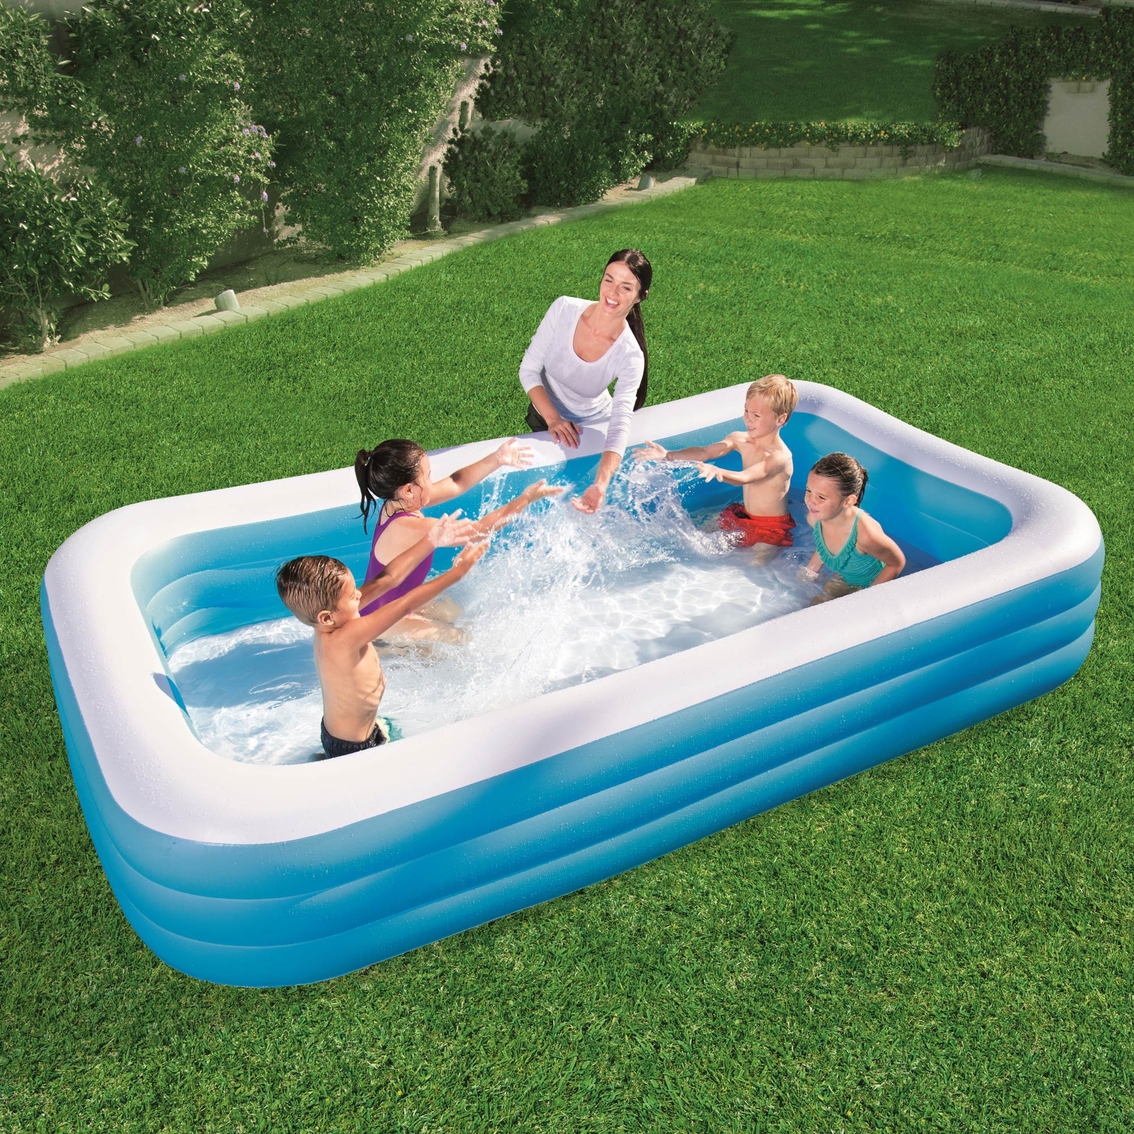 Bestway H2OGO! 10 ft. x 6 ft. x 22 in.  Deluxe Blue Rectangular Family Pool - Image 2 of 2